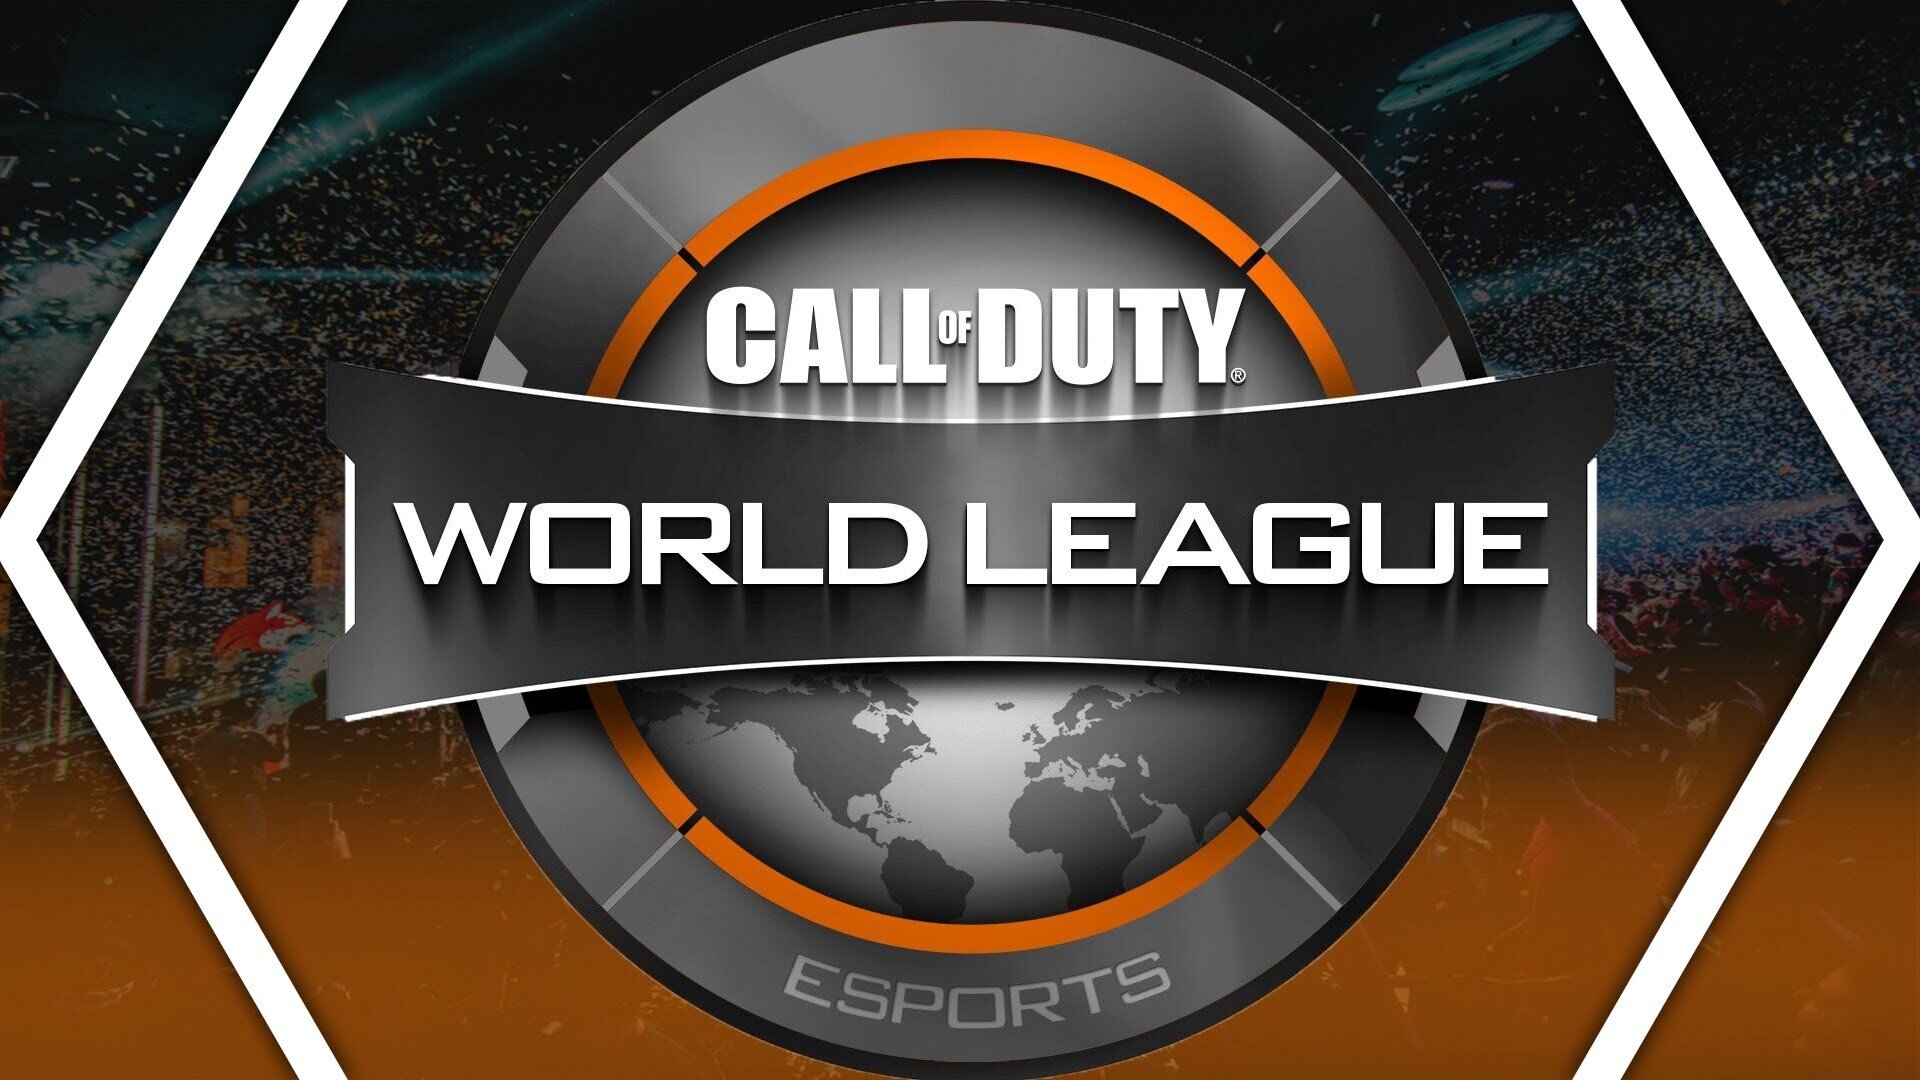 Activision Blizzard announced several key changes to the upcoming CWL - including rosters moving from 4 to 5 players.